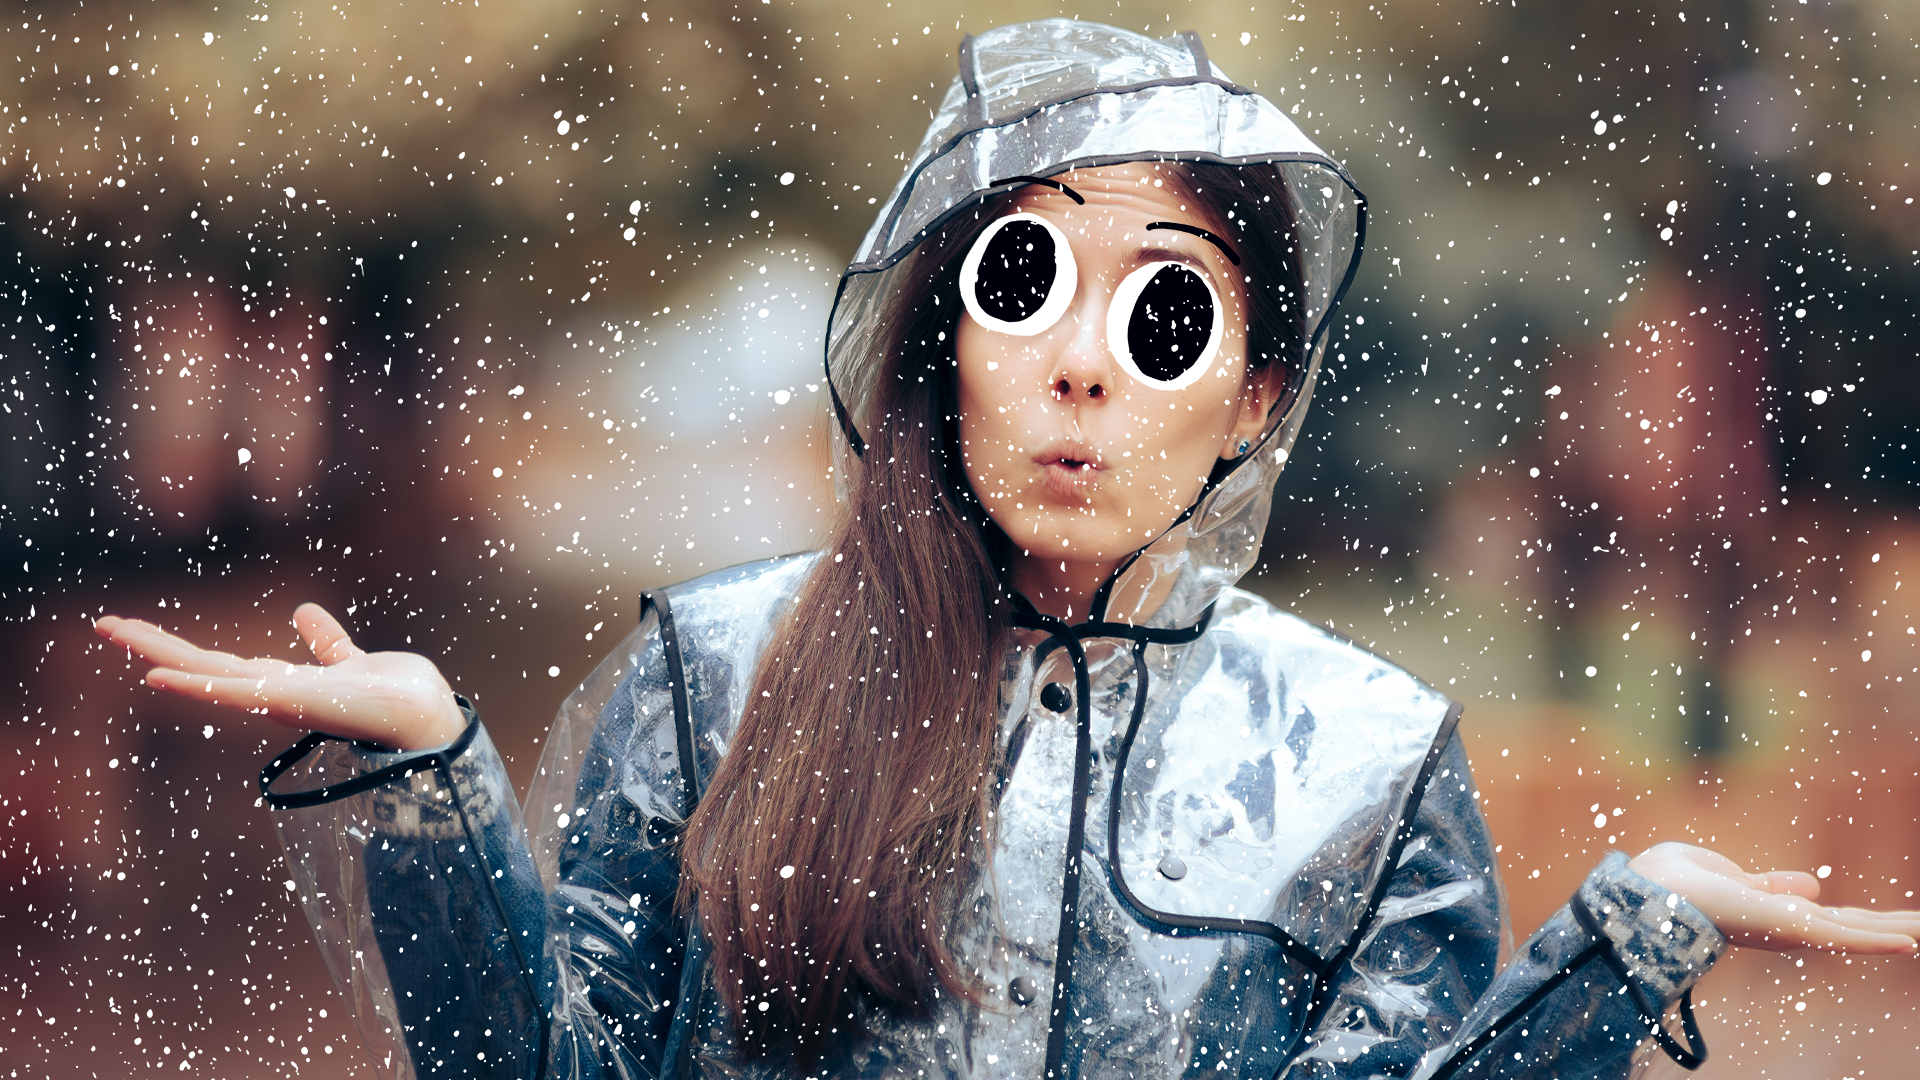 Woman looking confused in snowy weather